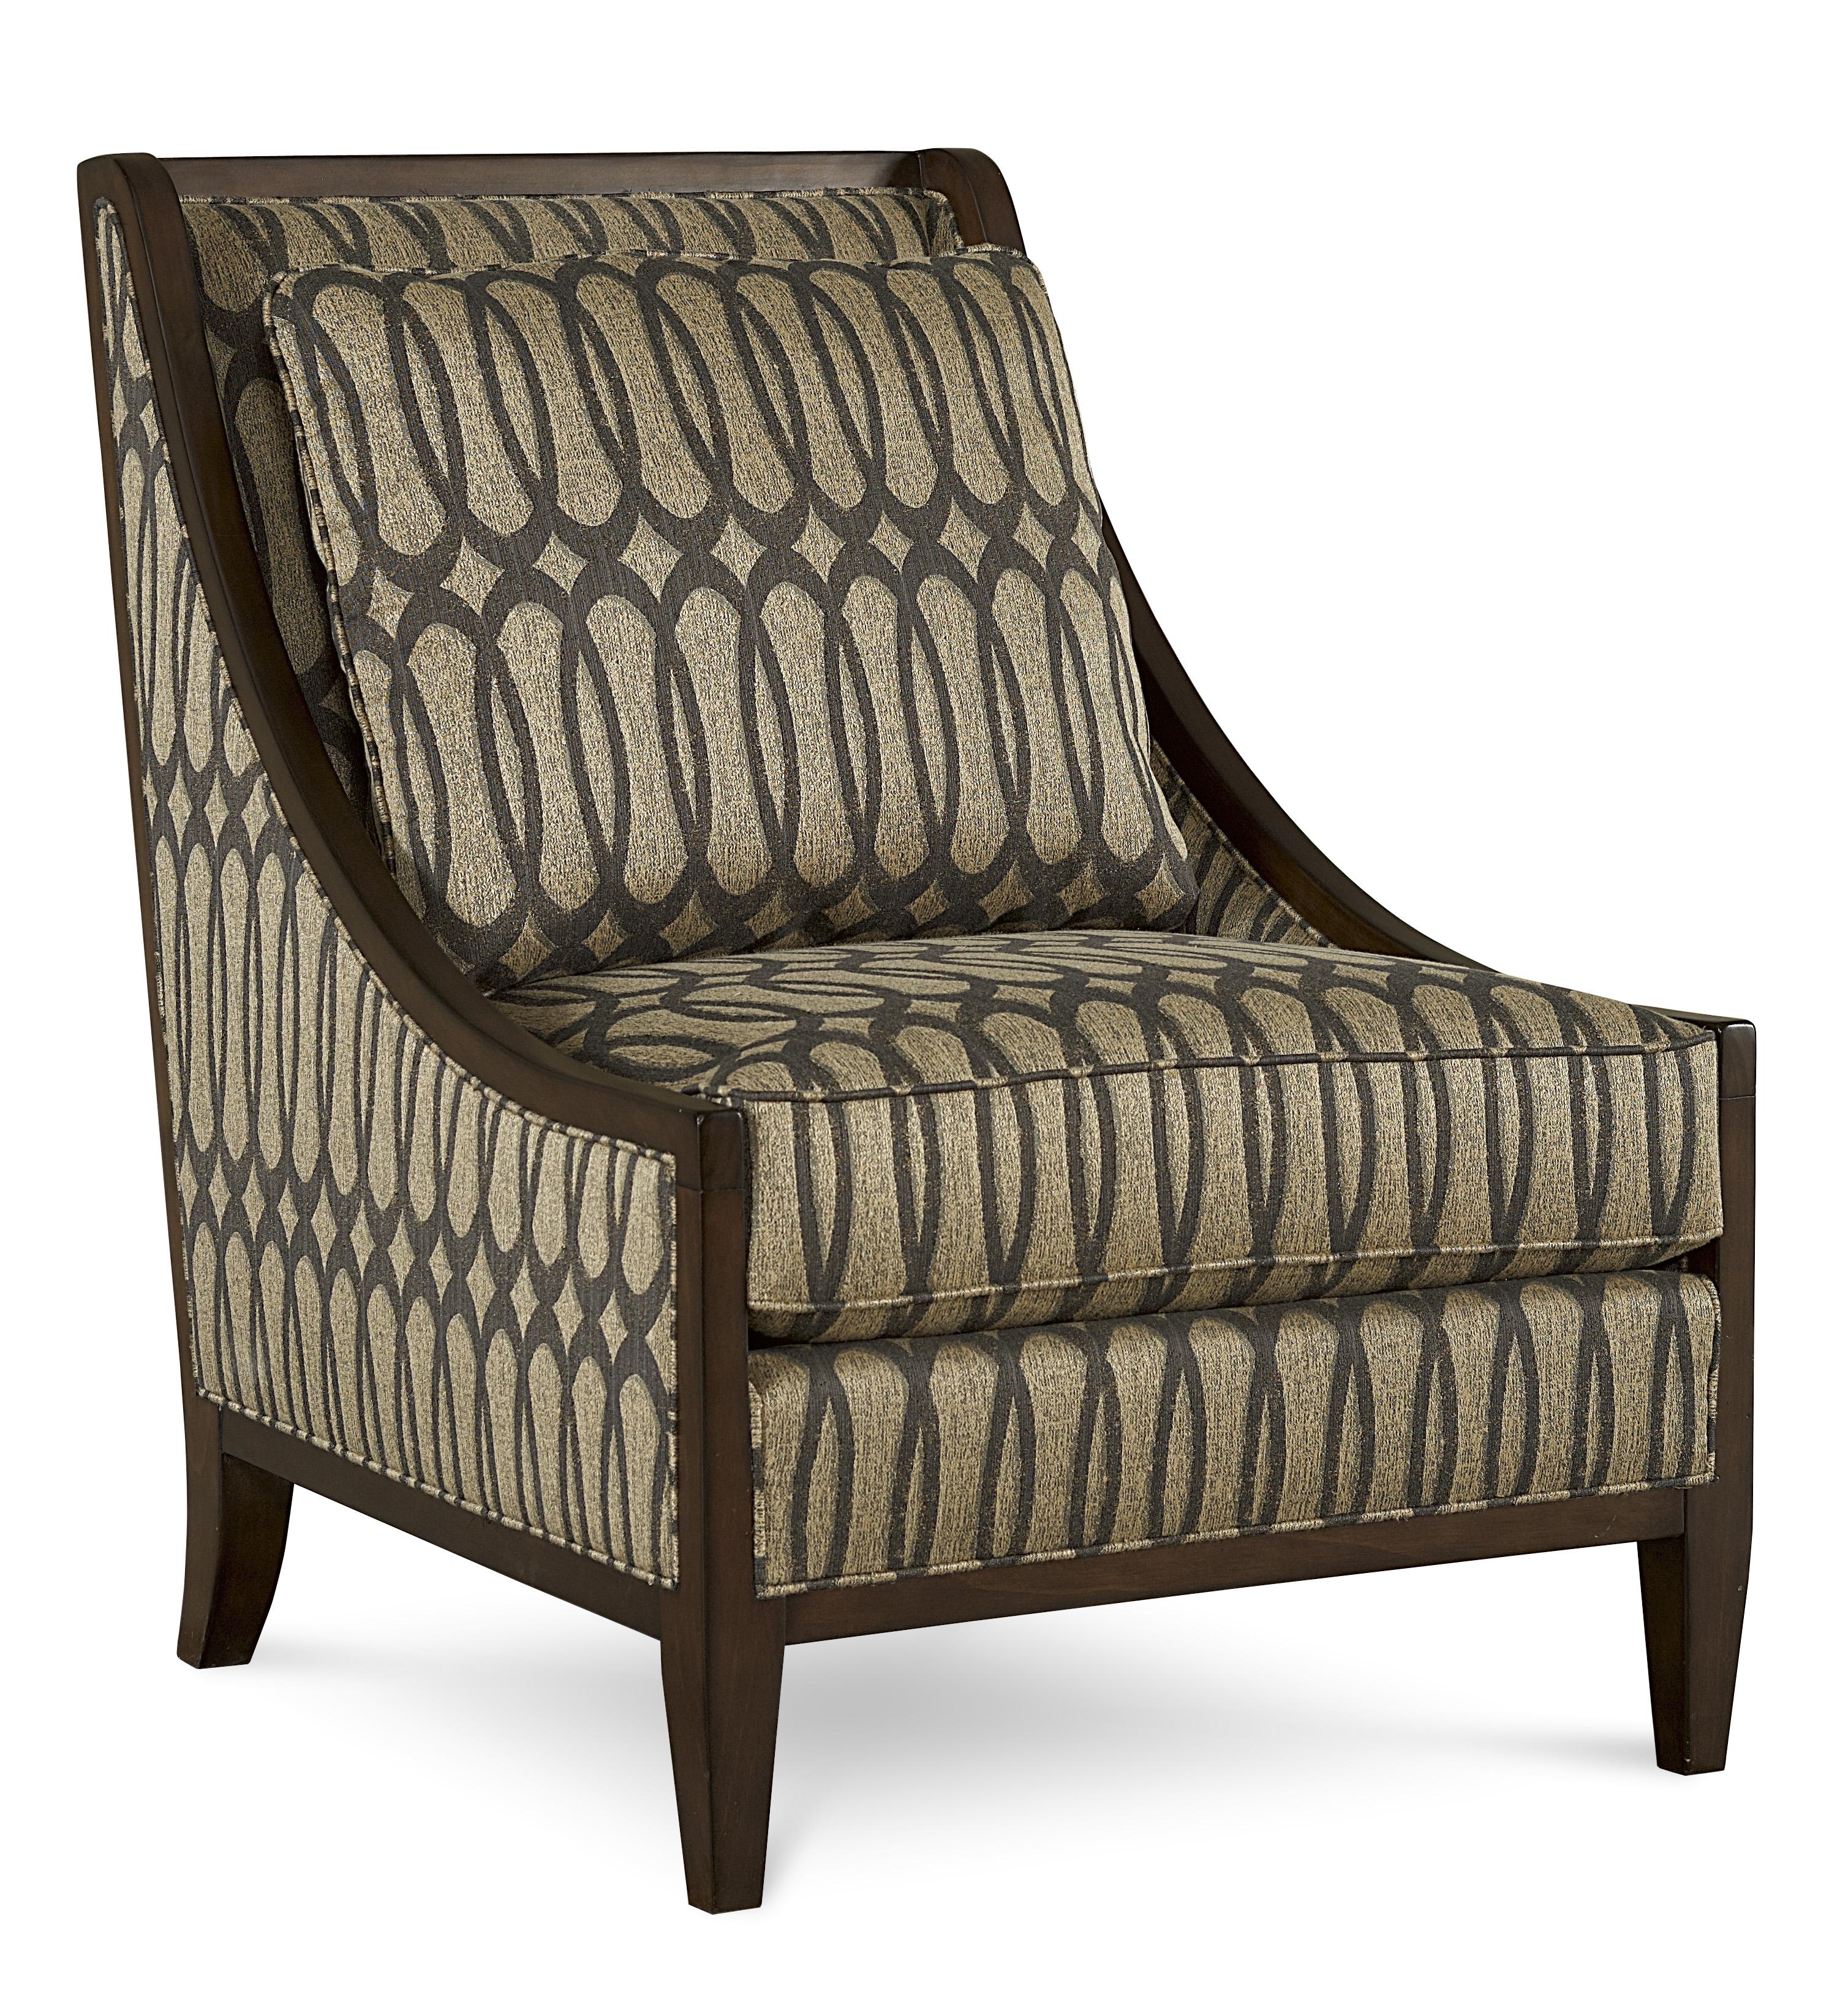 Classic, Traditional Arm Chairs HARPER Intrigue 161503-5036AA in Brown Fabric